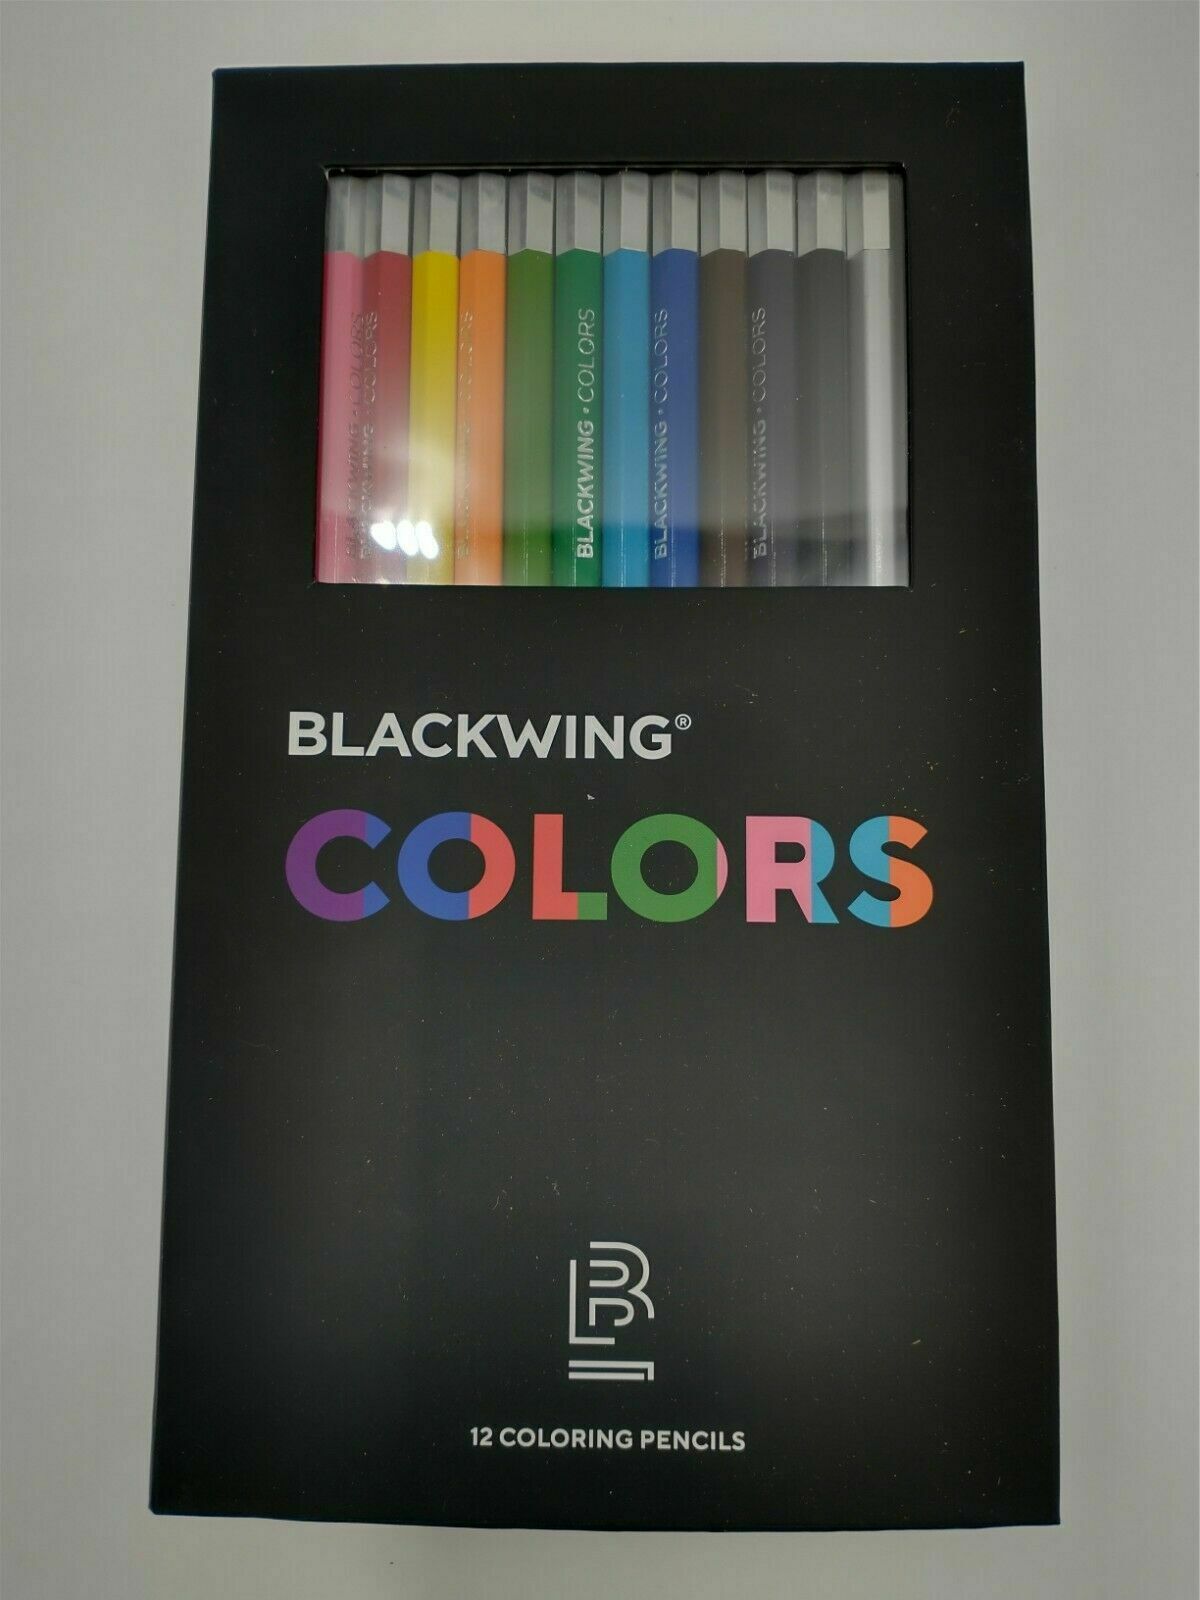 Blackwing Colors 12 Soft Smooth Coloring Pencils